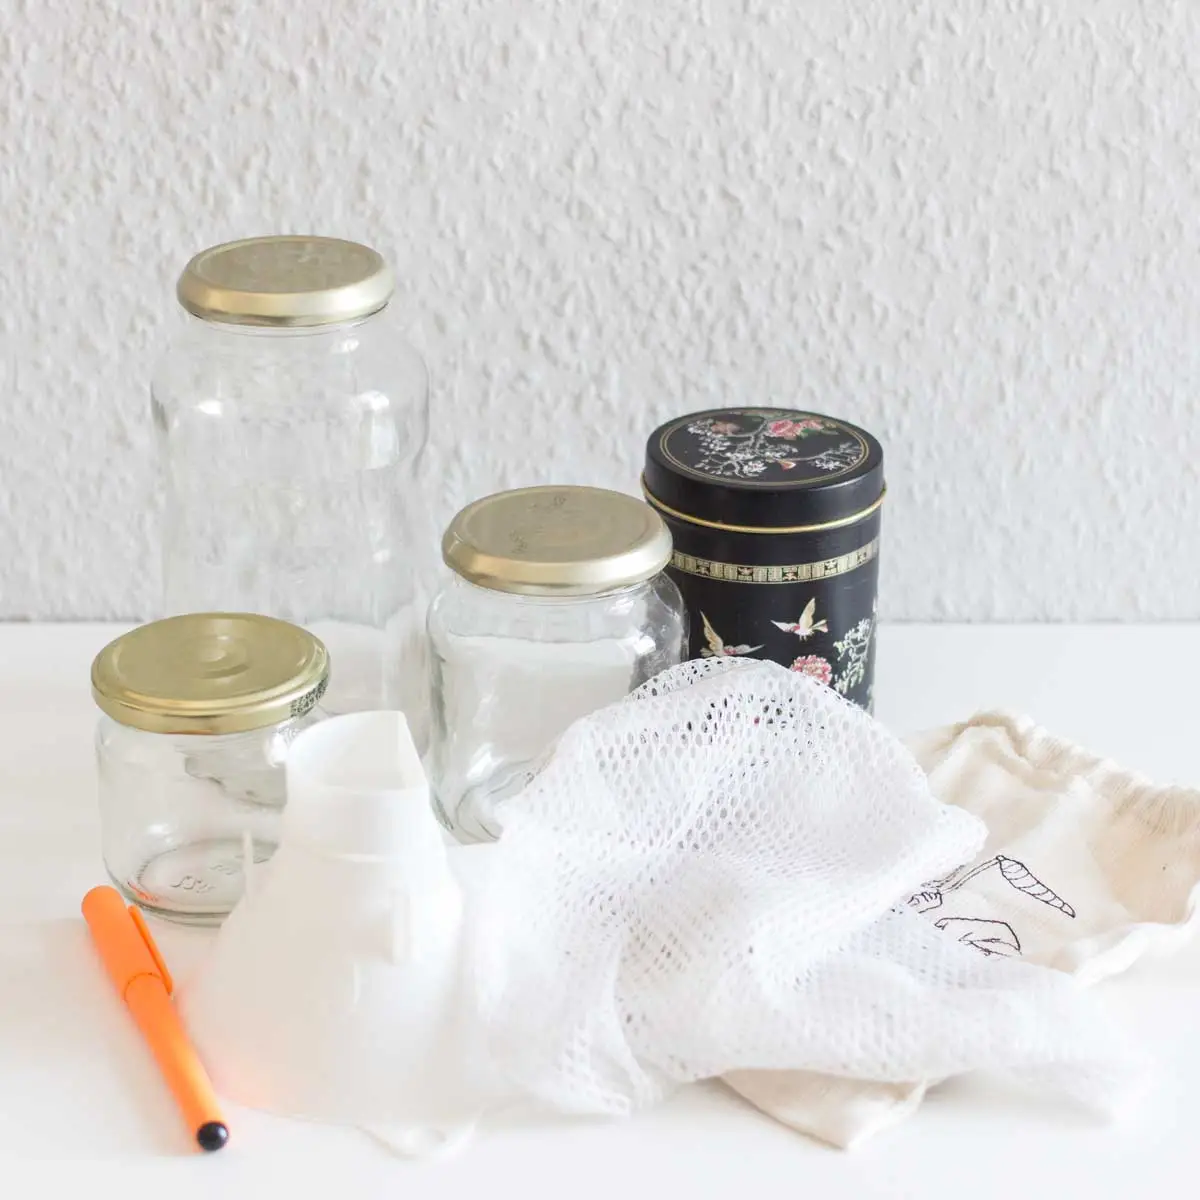 How to Live Zero Waste on a Budget - what is zero-based budgeting